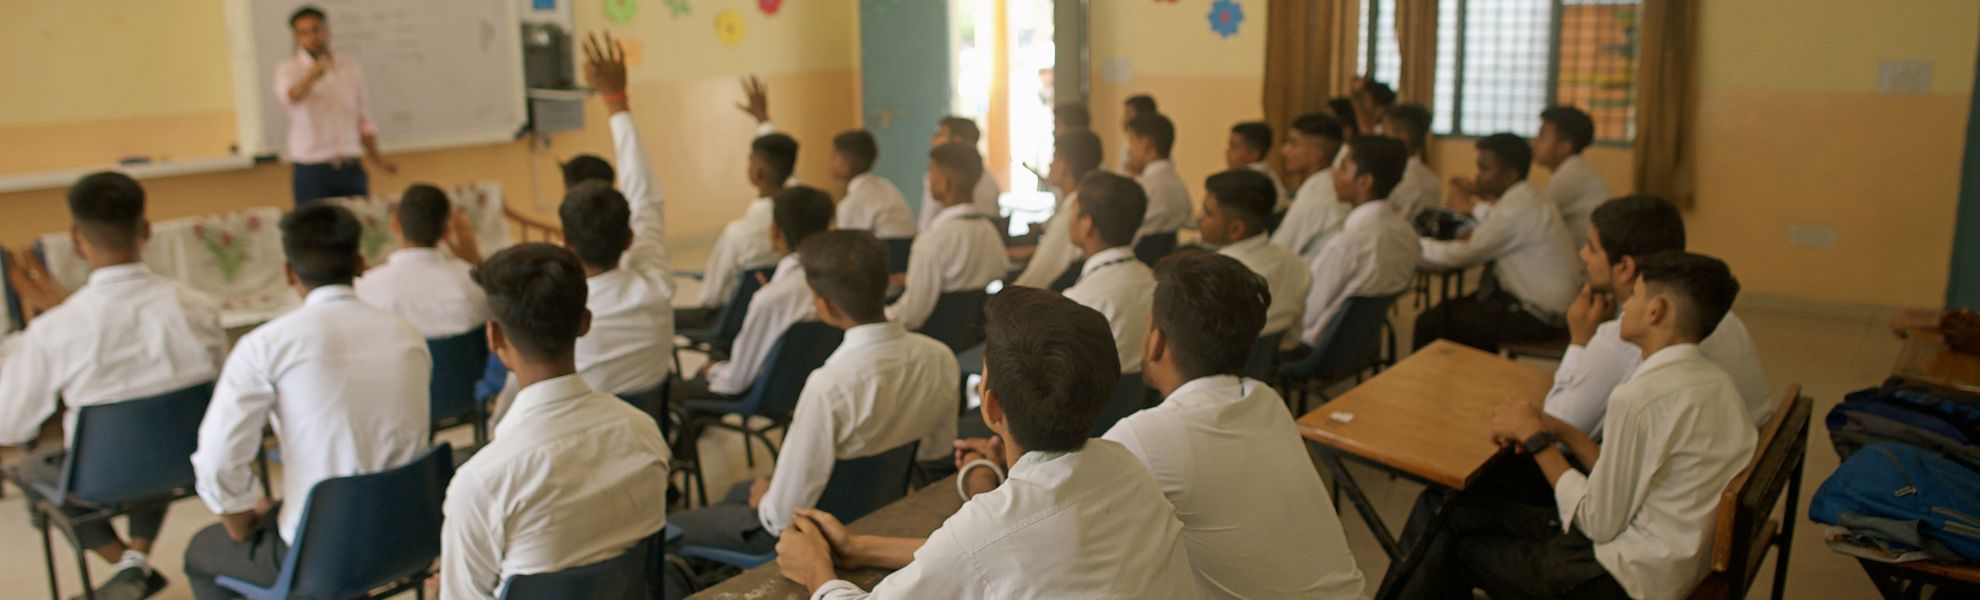 A deep dive on vocational training in India - Ampersand Group